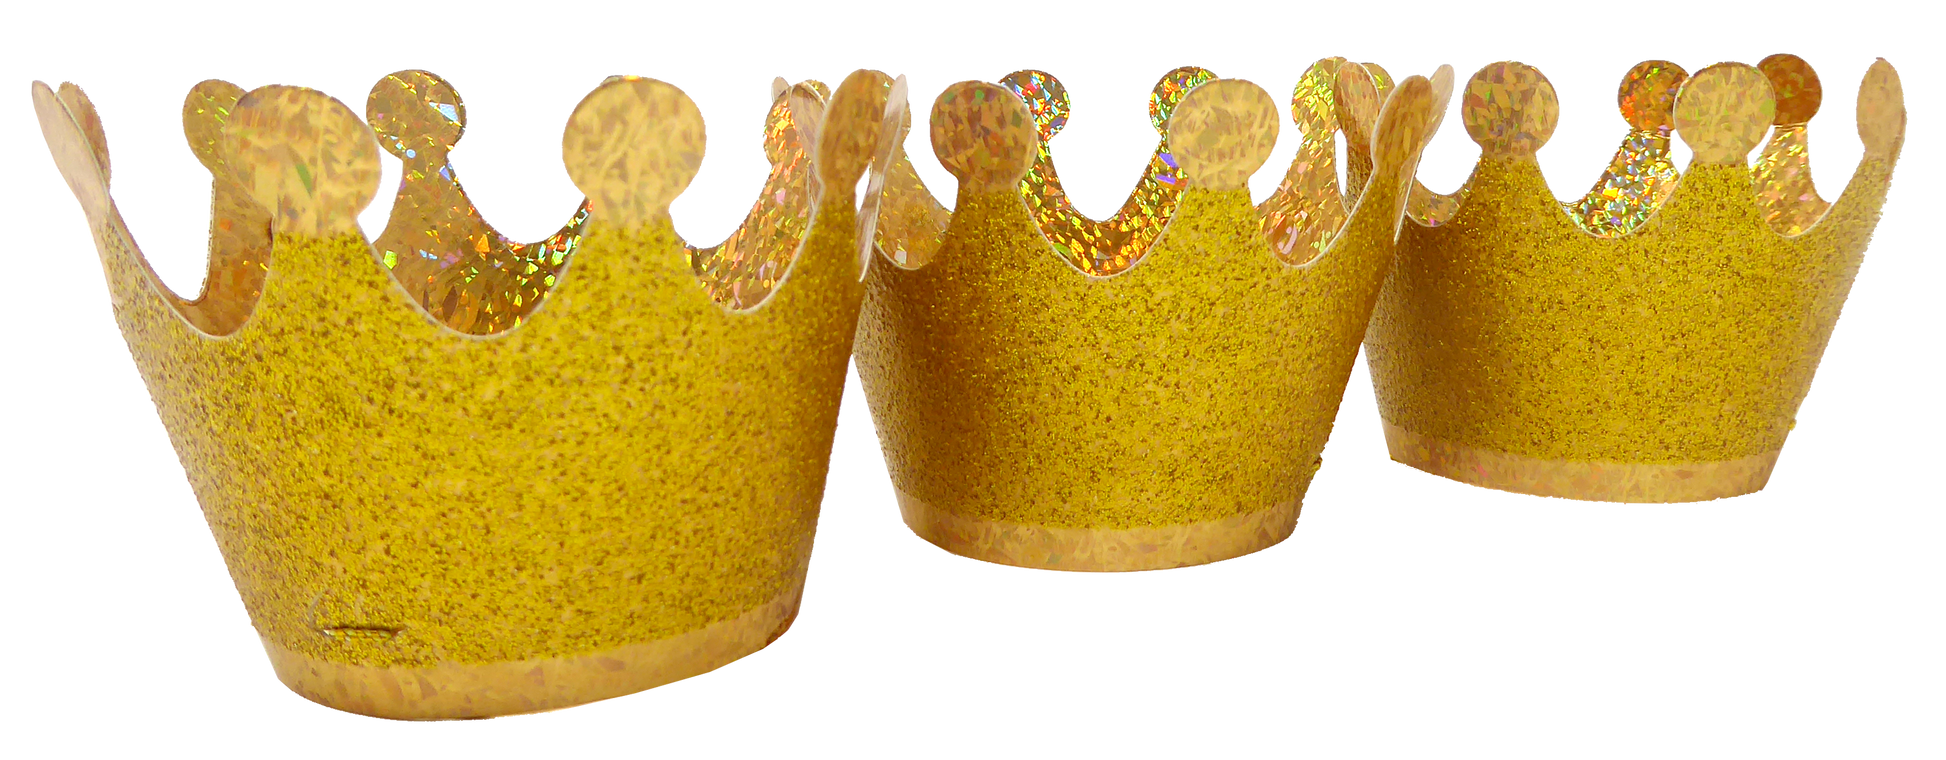 Mini Gold Party Crowns